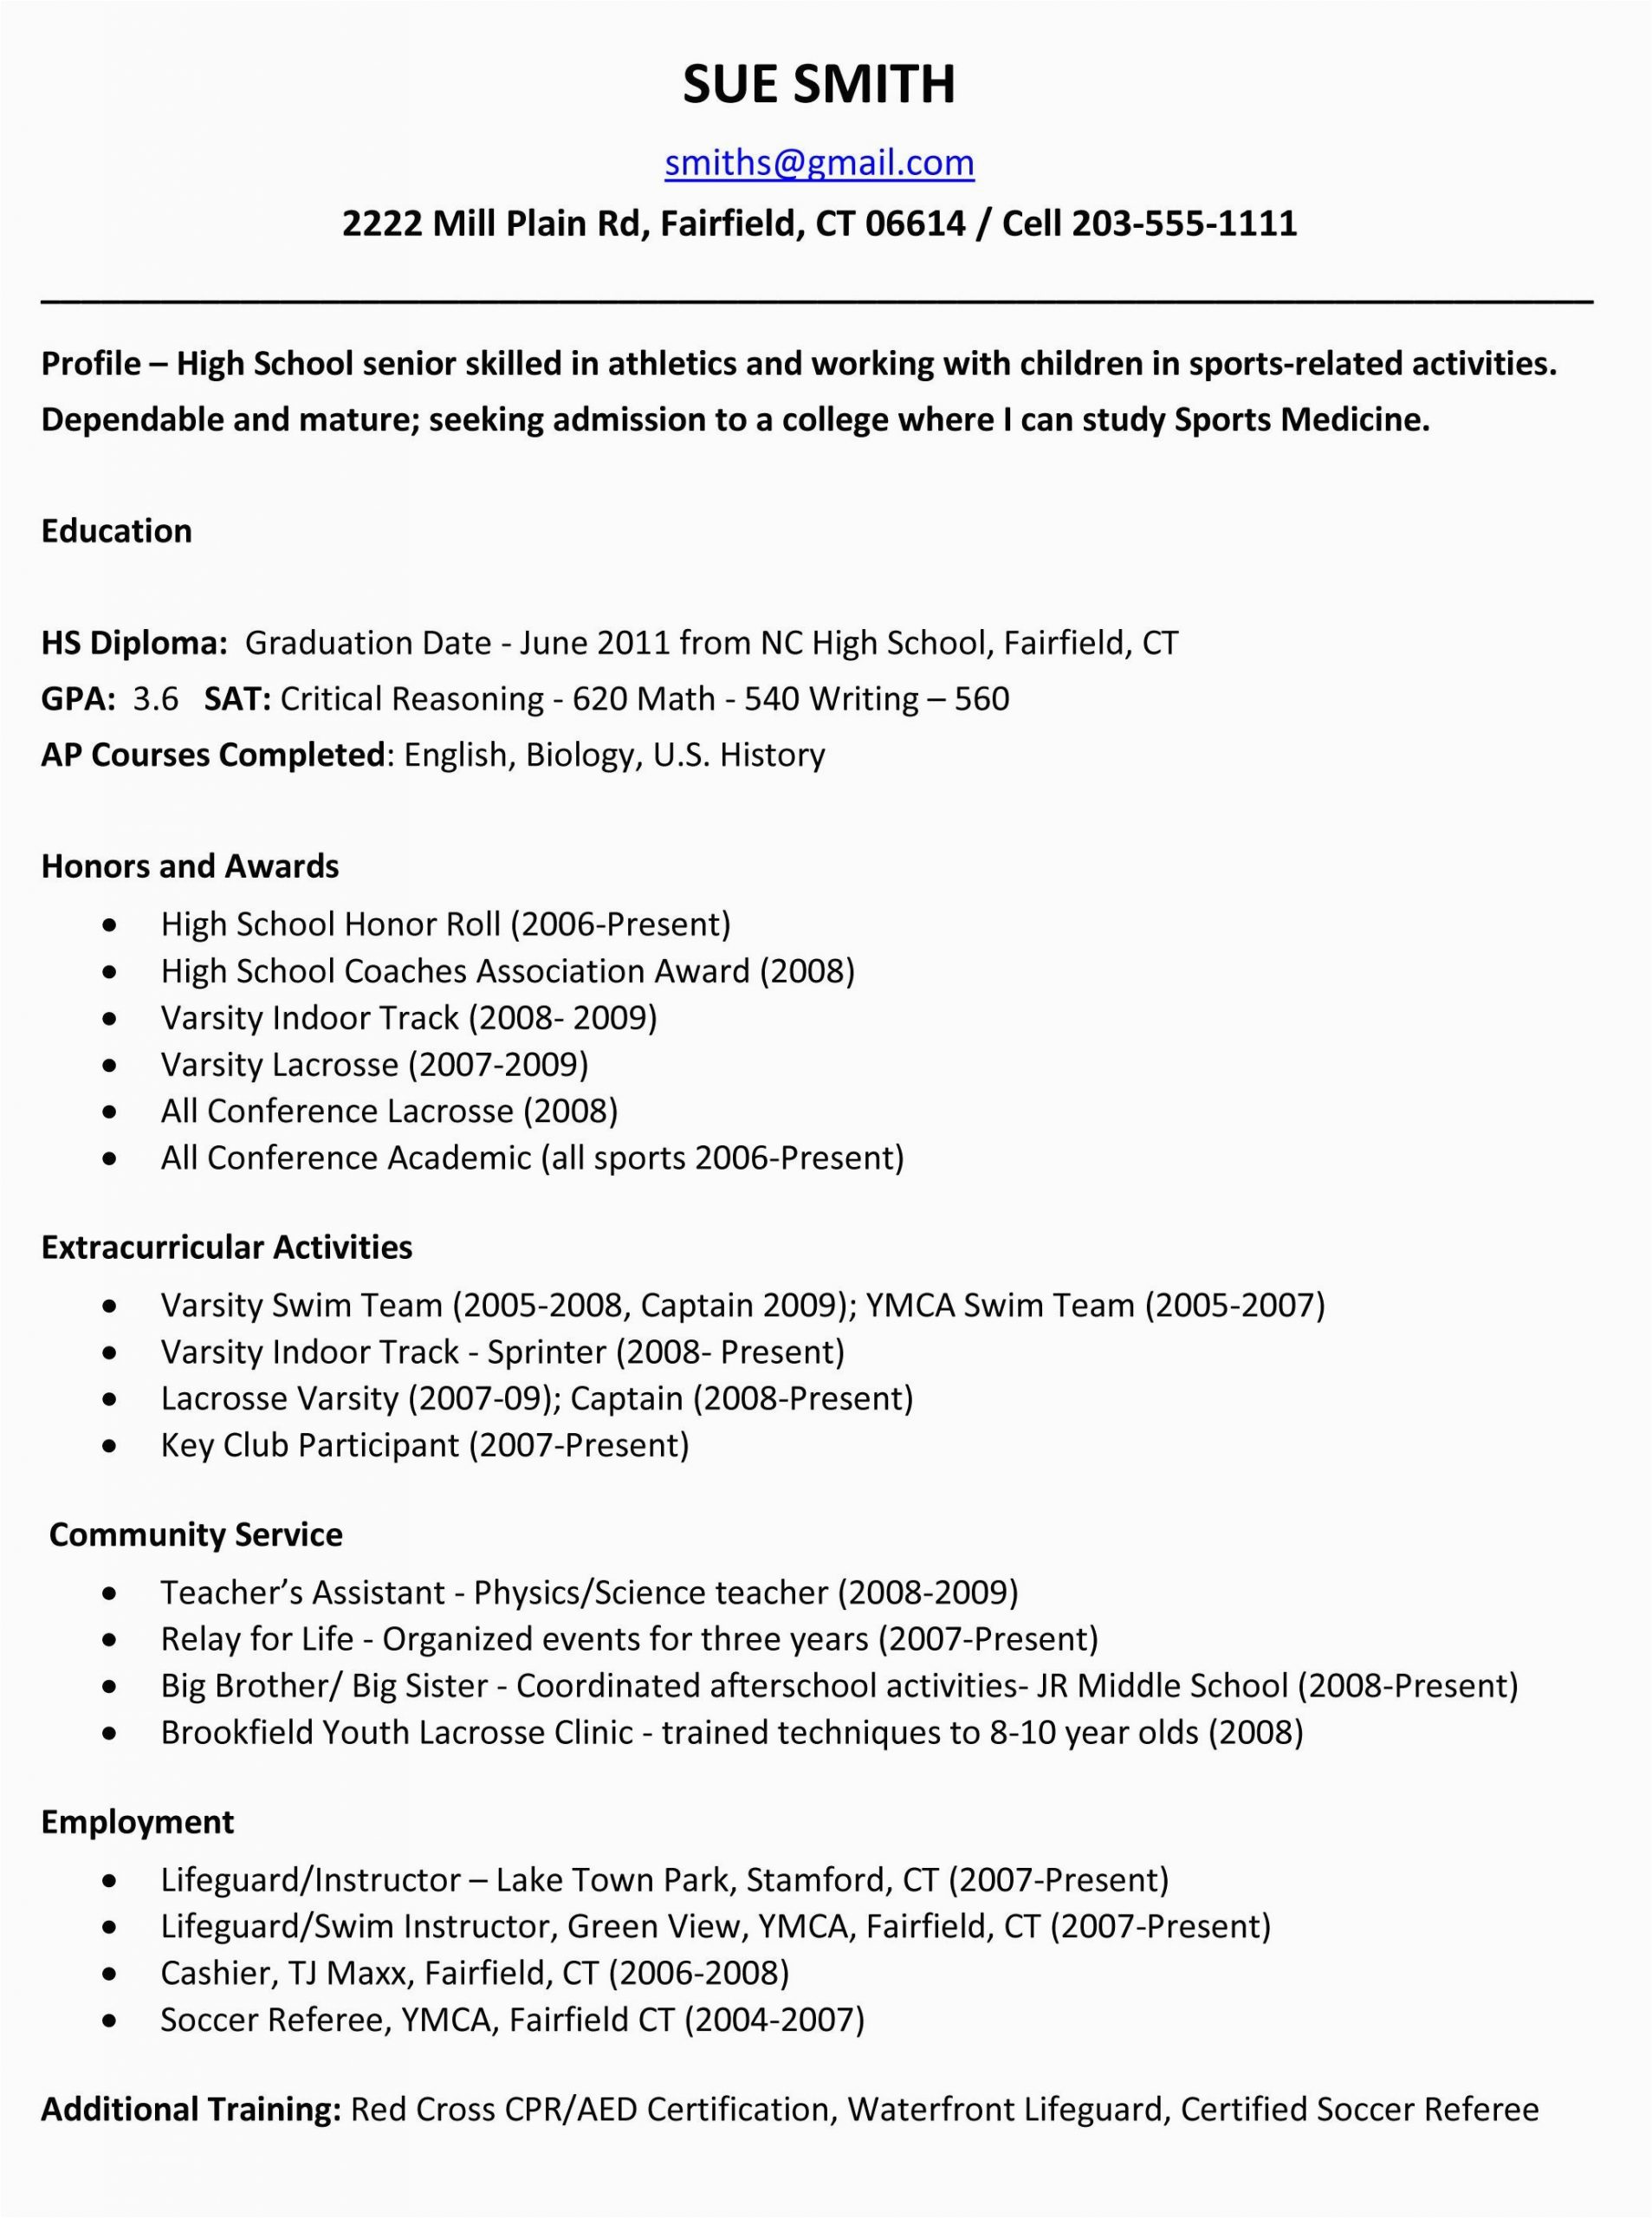 Sample Resume for High School Student Applying to College Sample Resumes